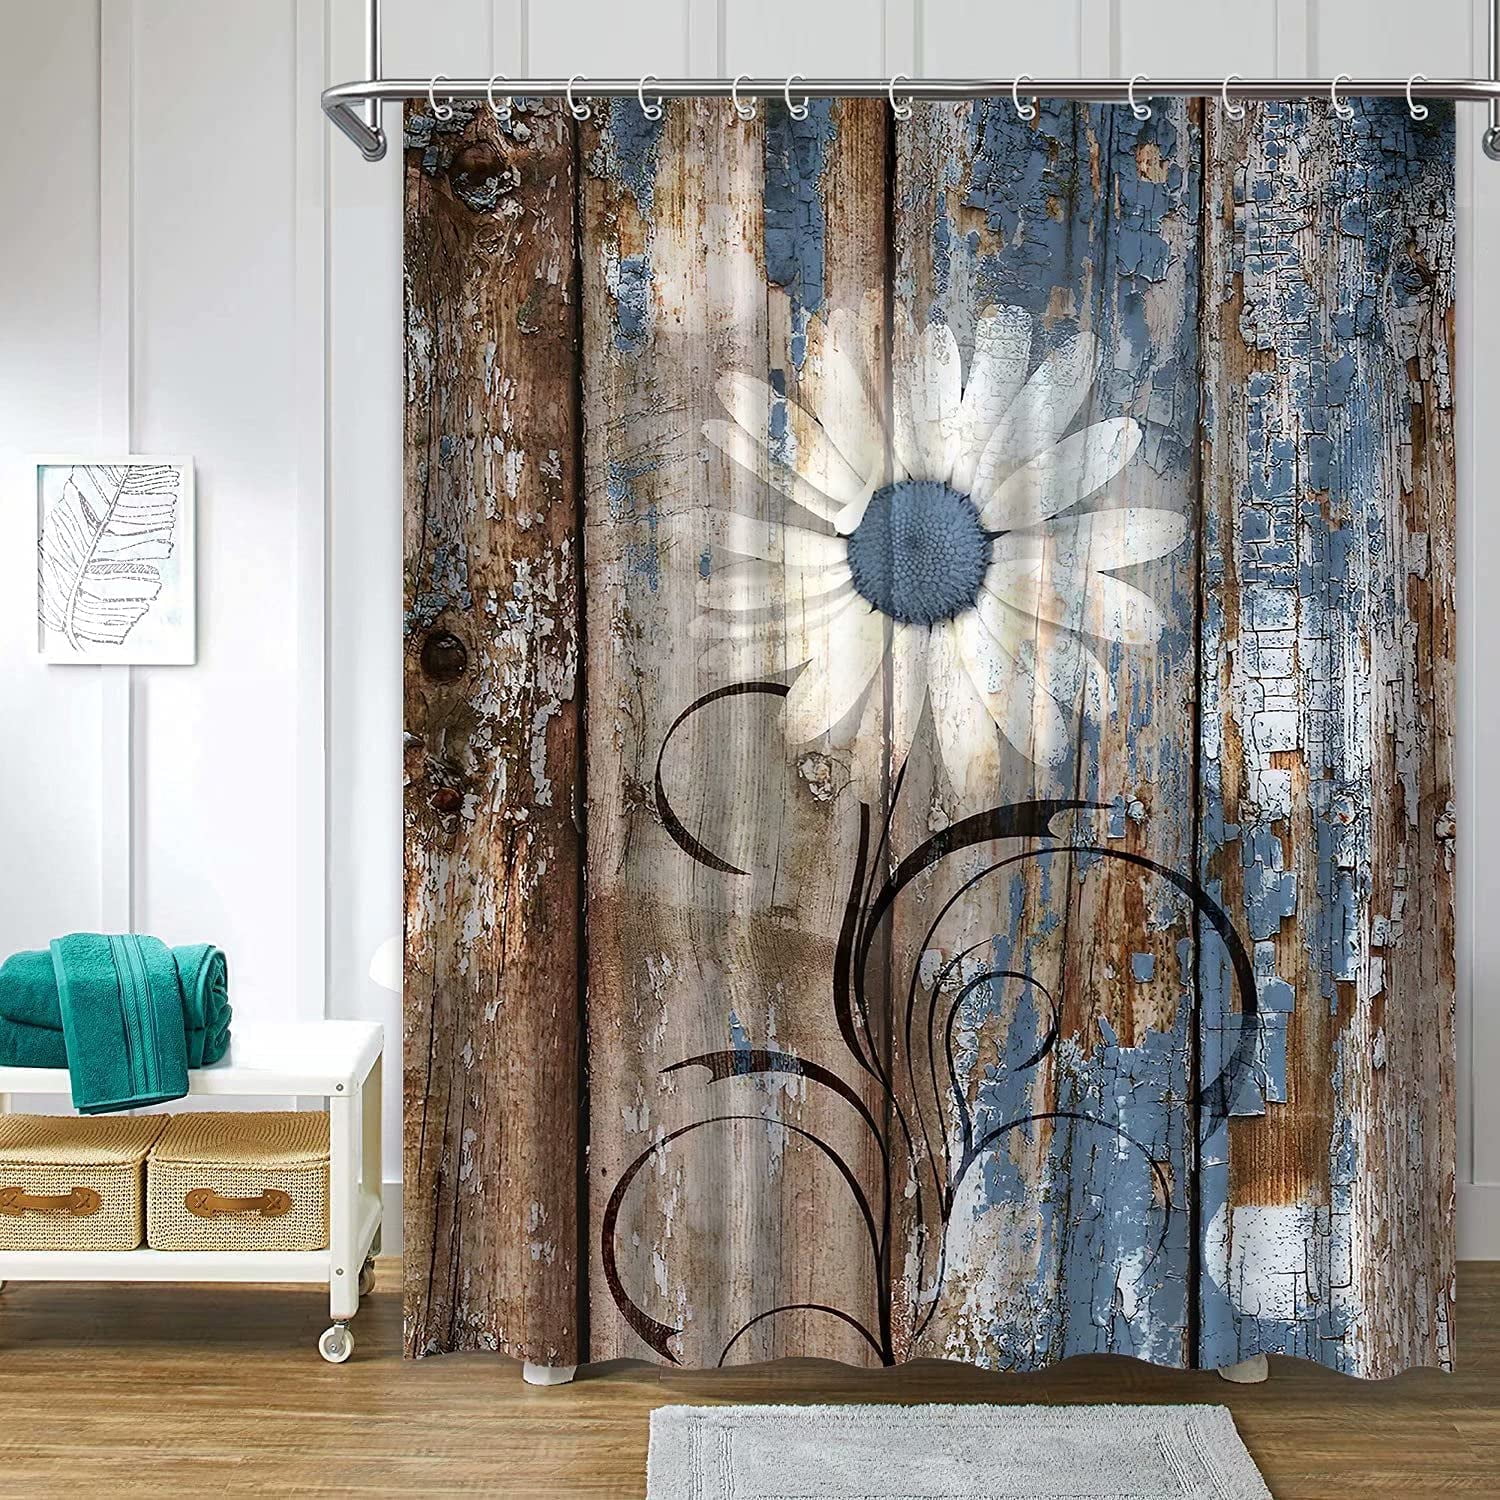 Waterproof Polyester Fabric Bathroom Shower Curtain Set with Hook Home Decor US 